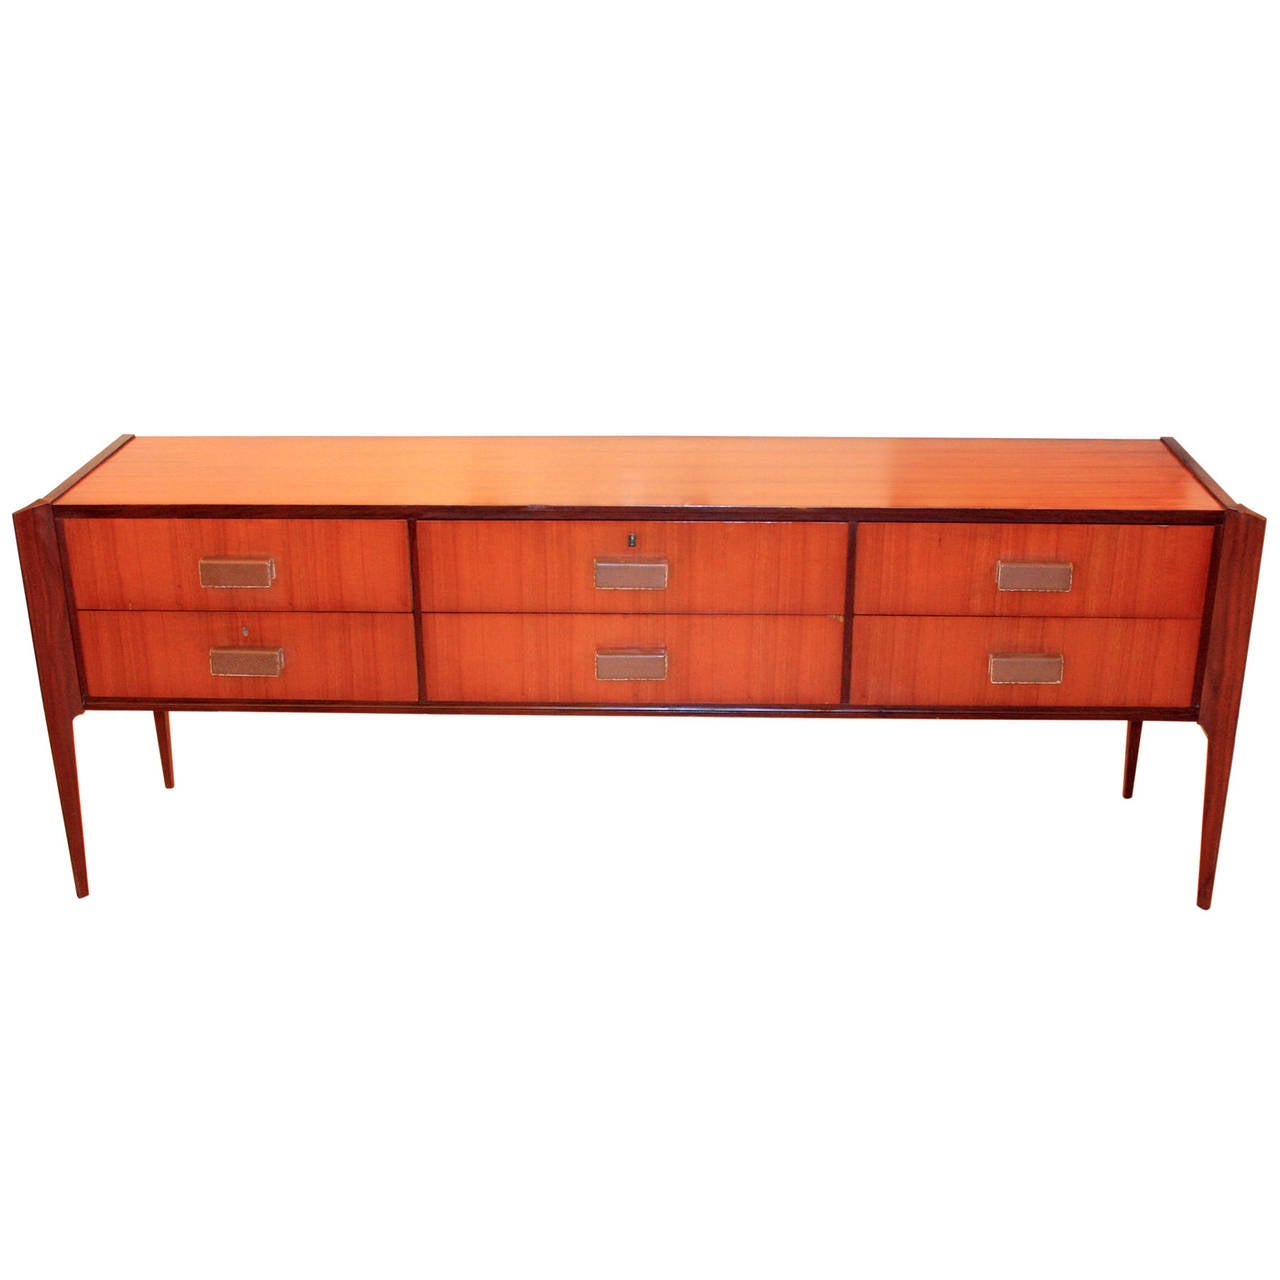 Italian design sideboard, leather finished handles tapered legs by Dassi, circa 1960s.